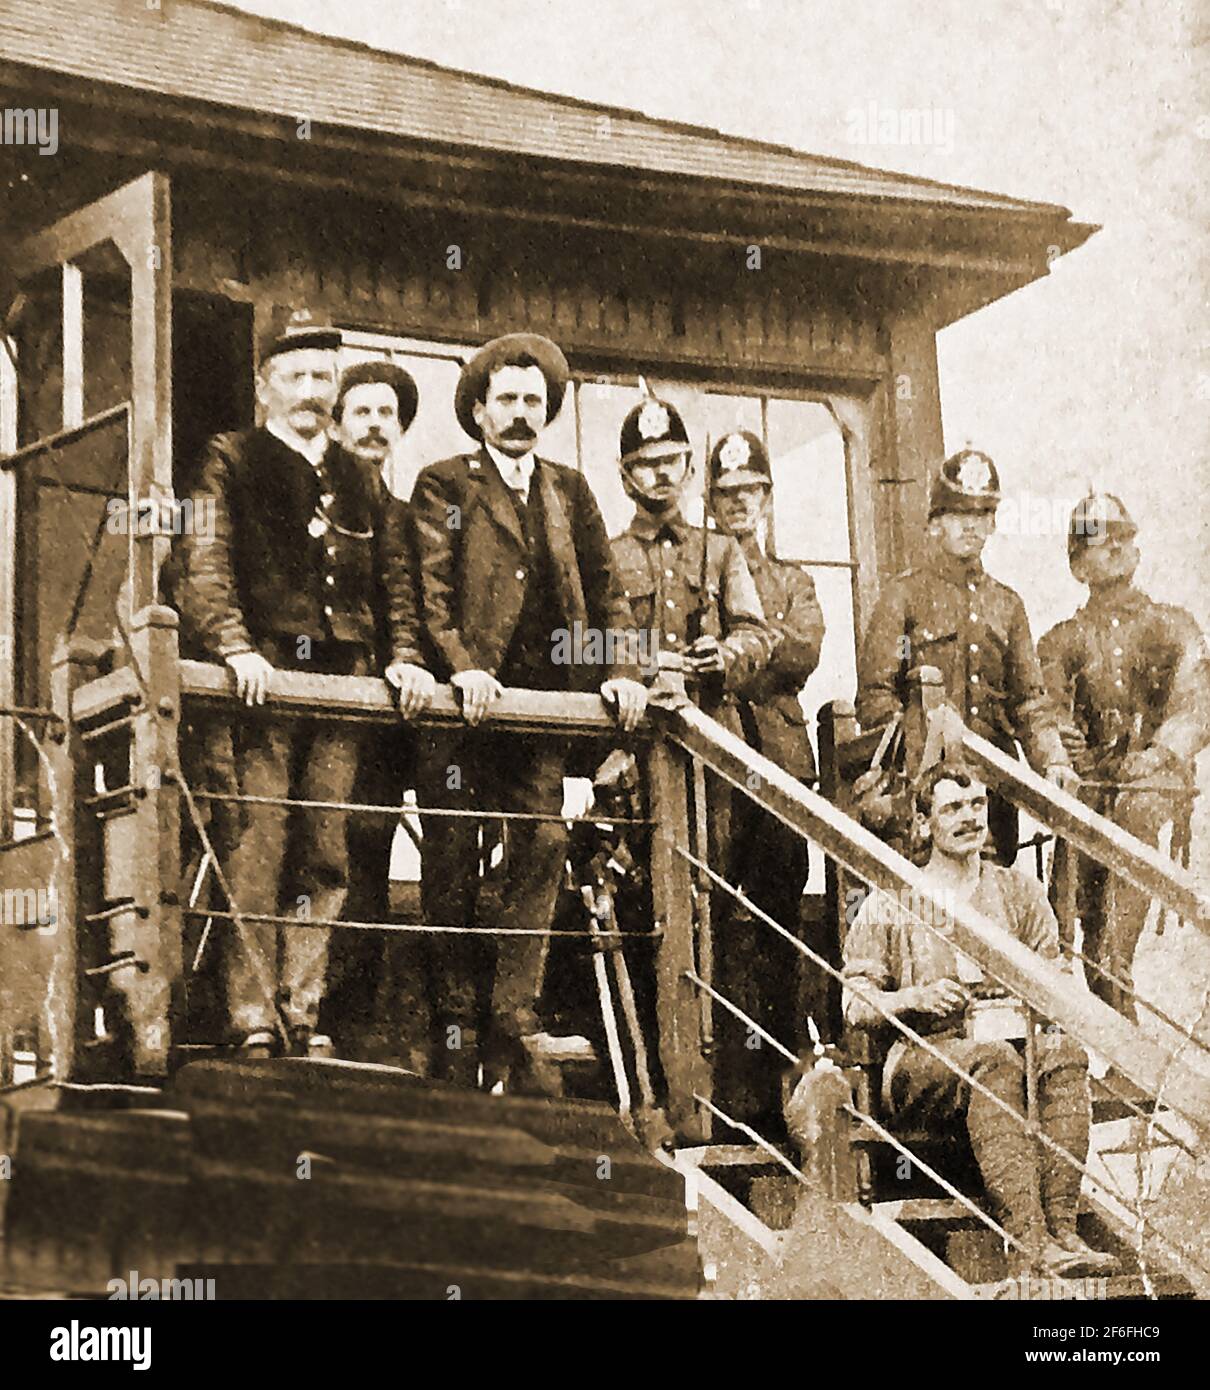 1911 UK Railway Strike - Military guards supervise the signalling staff at the Stockinford signal box during a heatwave. Stockingford has now been incorporated administratively into Nuneaton. Stockingford's   a railway station operated between 1864 and 1968. Stock Photo